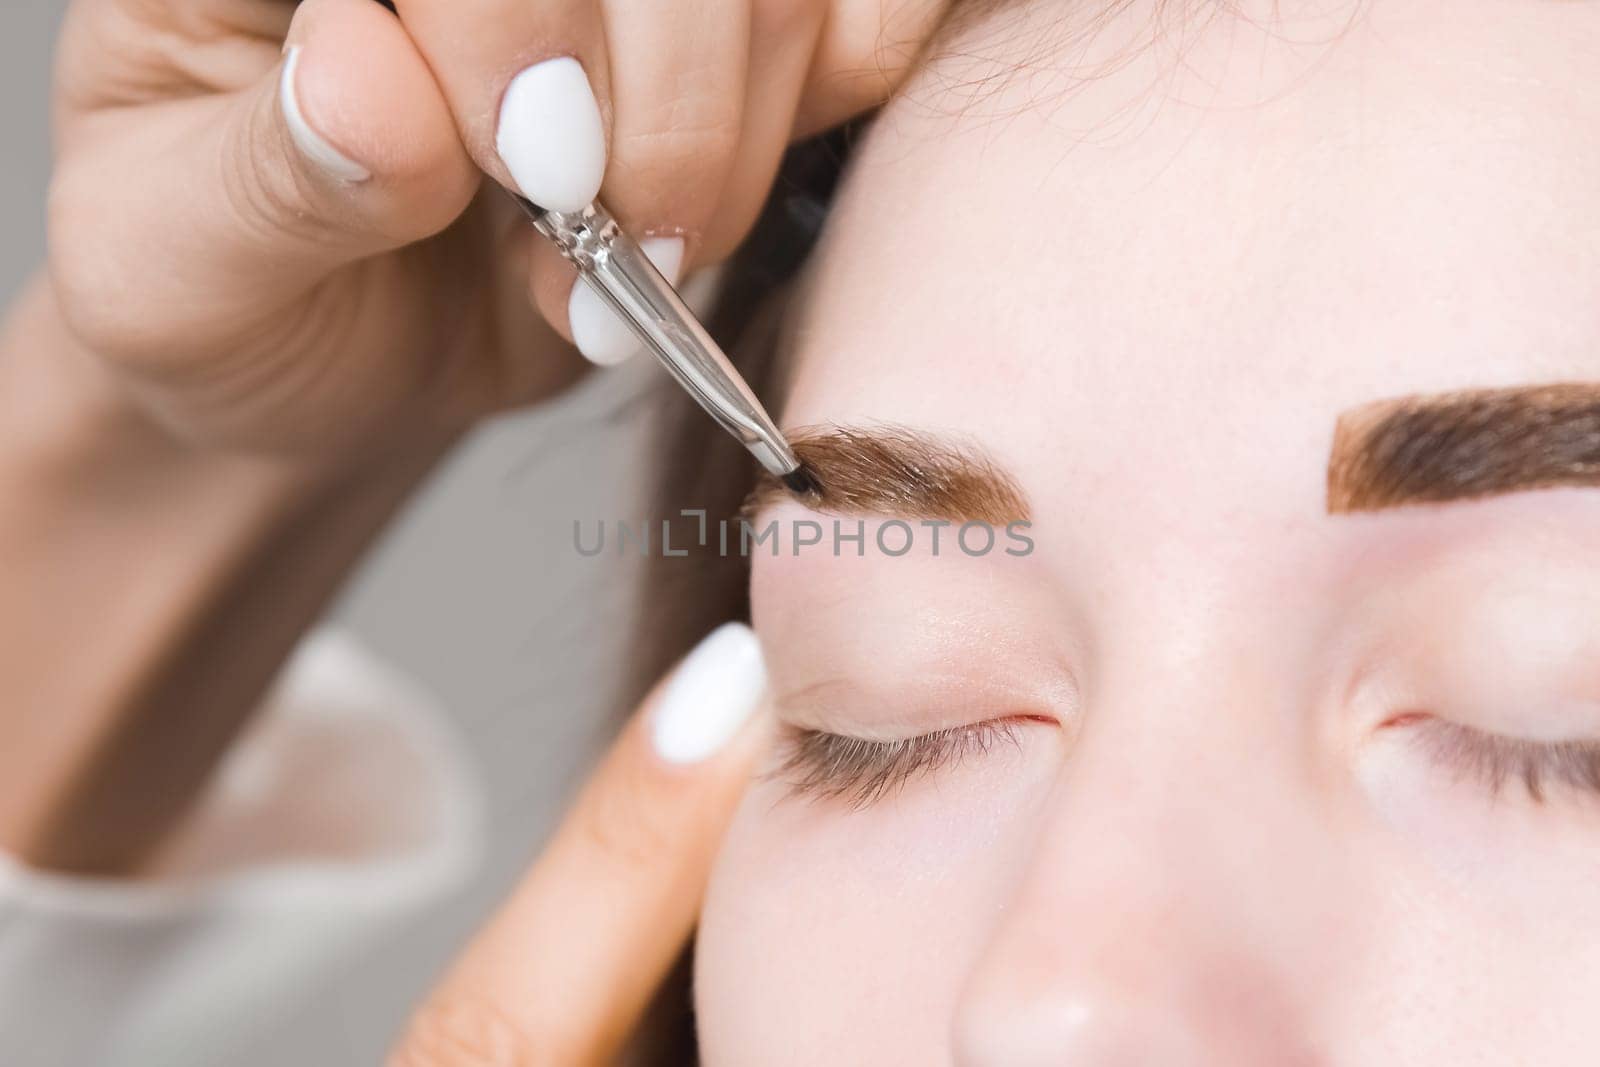 Eyebrow tinting. Close-up of a master applying eyebrow dye with a brush. Cosmetic procedures, permanent eyebrow makeup. correction and modeling of eyebrows in a beauty salon. perfect eyebrows.